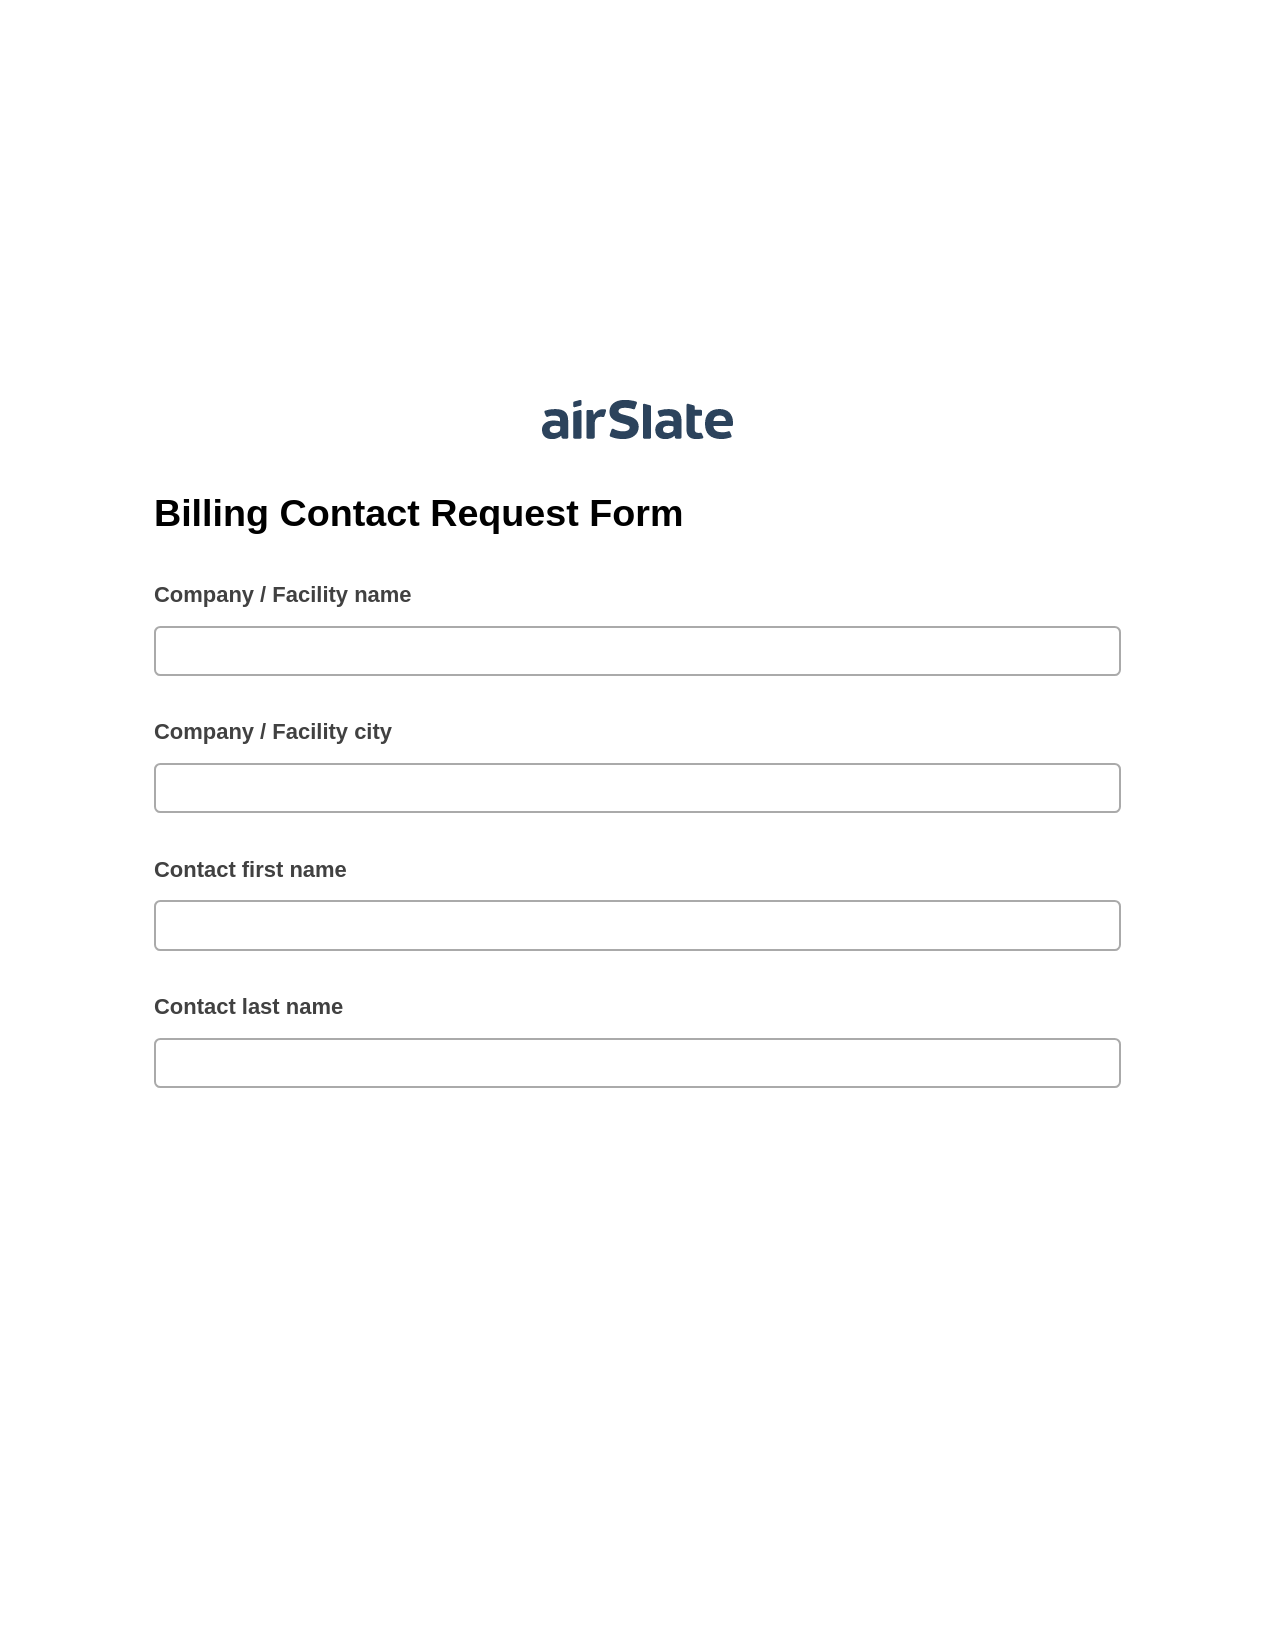 Billing Contact Request Form System Bot - Slack Two-Way Binding Bot, Send a Slate with Roles Bot, Google Drive Bot